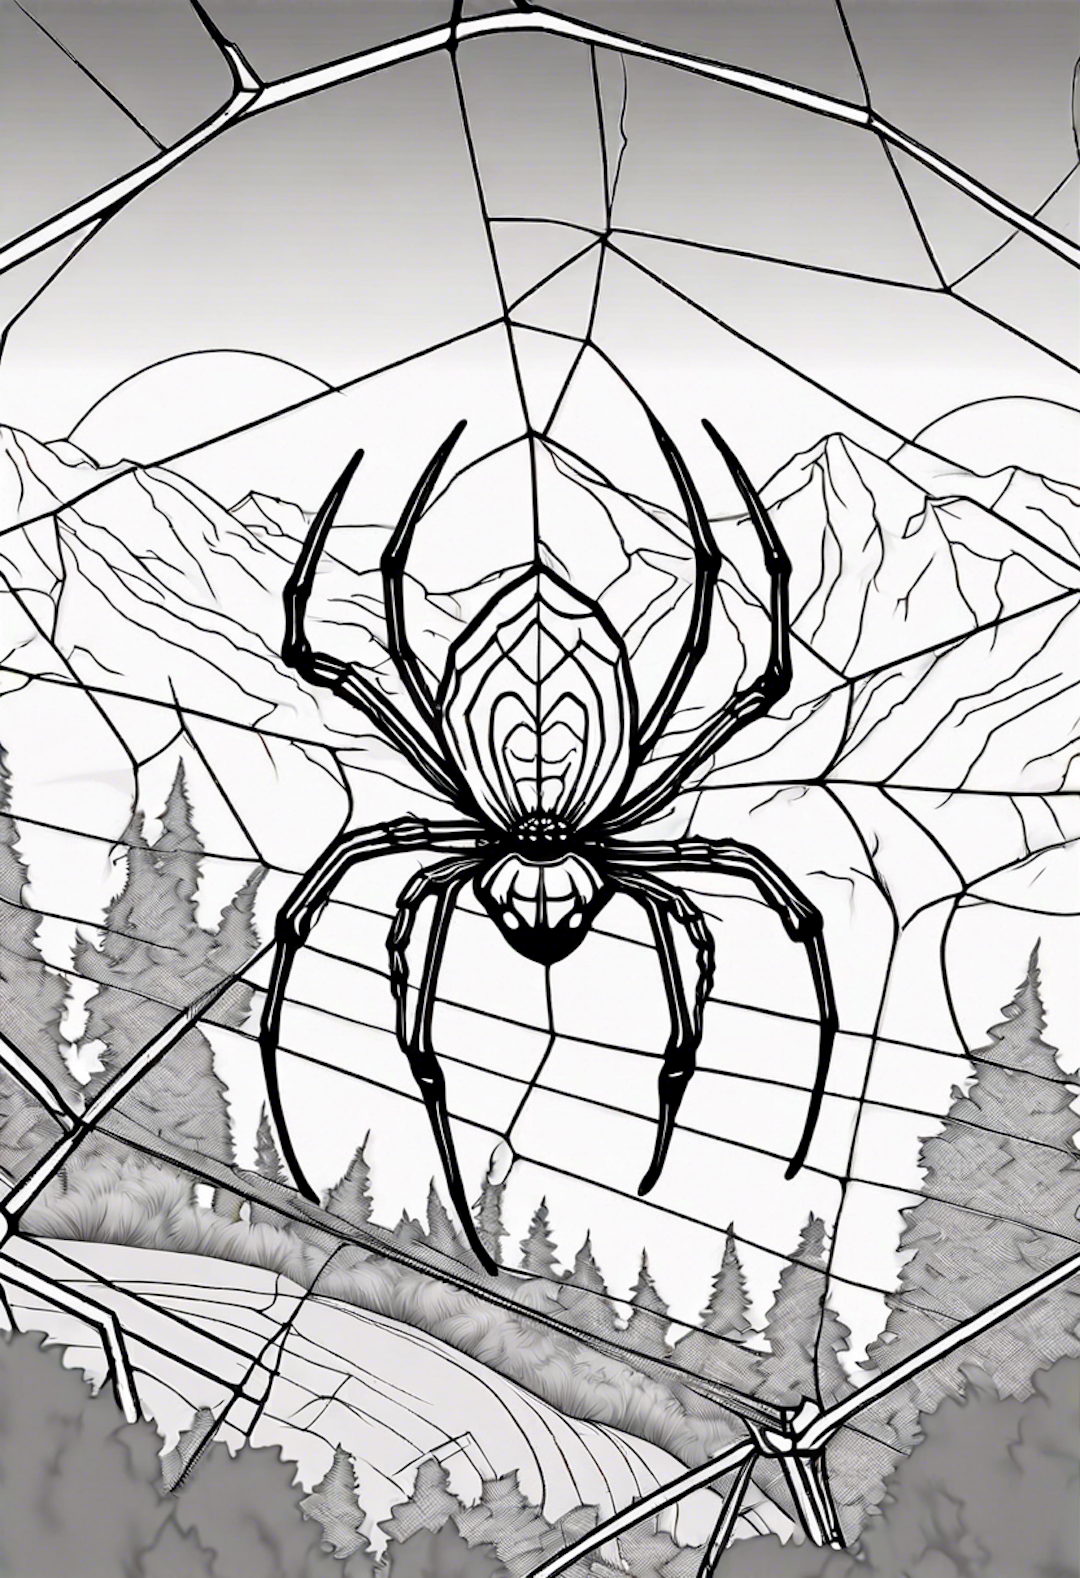 A Spider On A Web At A Mountain